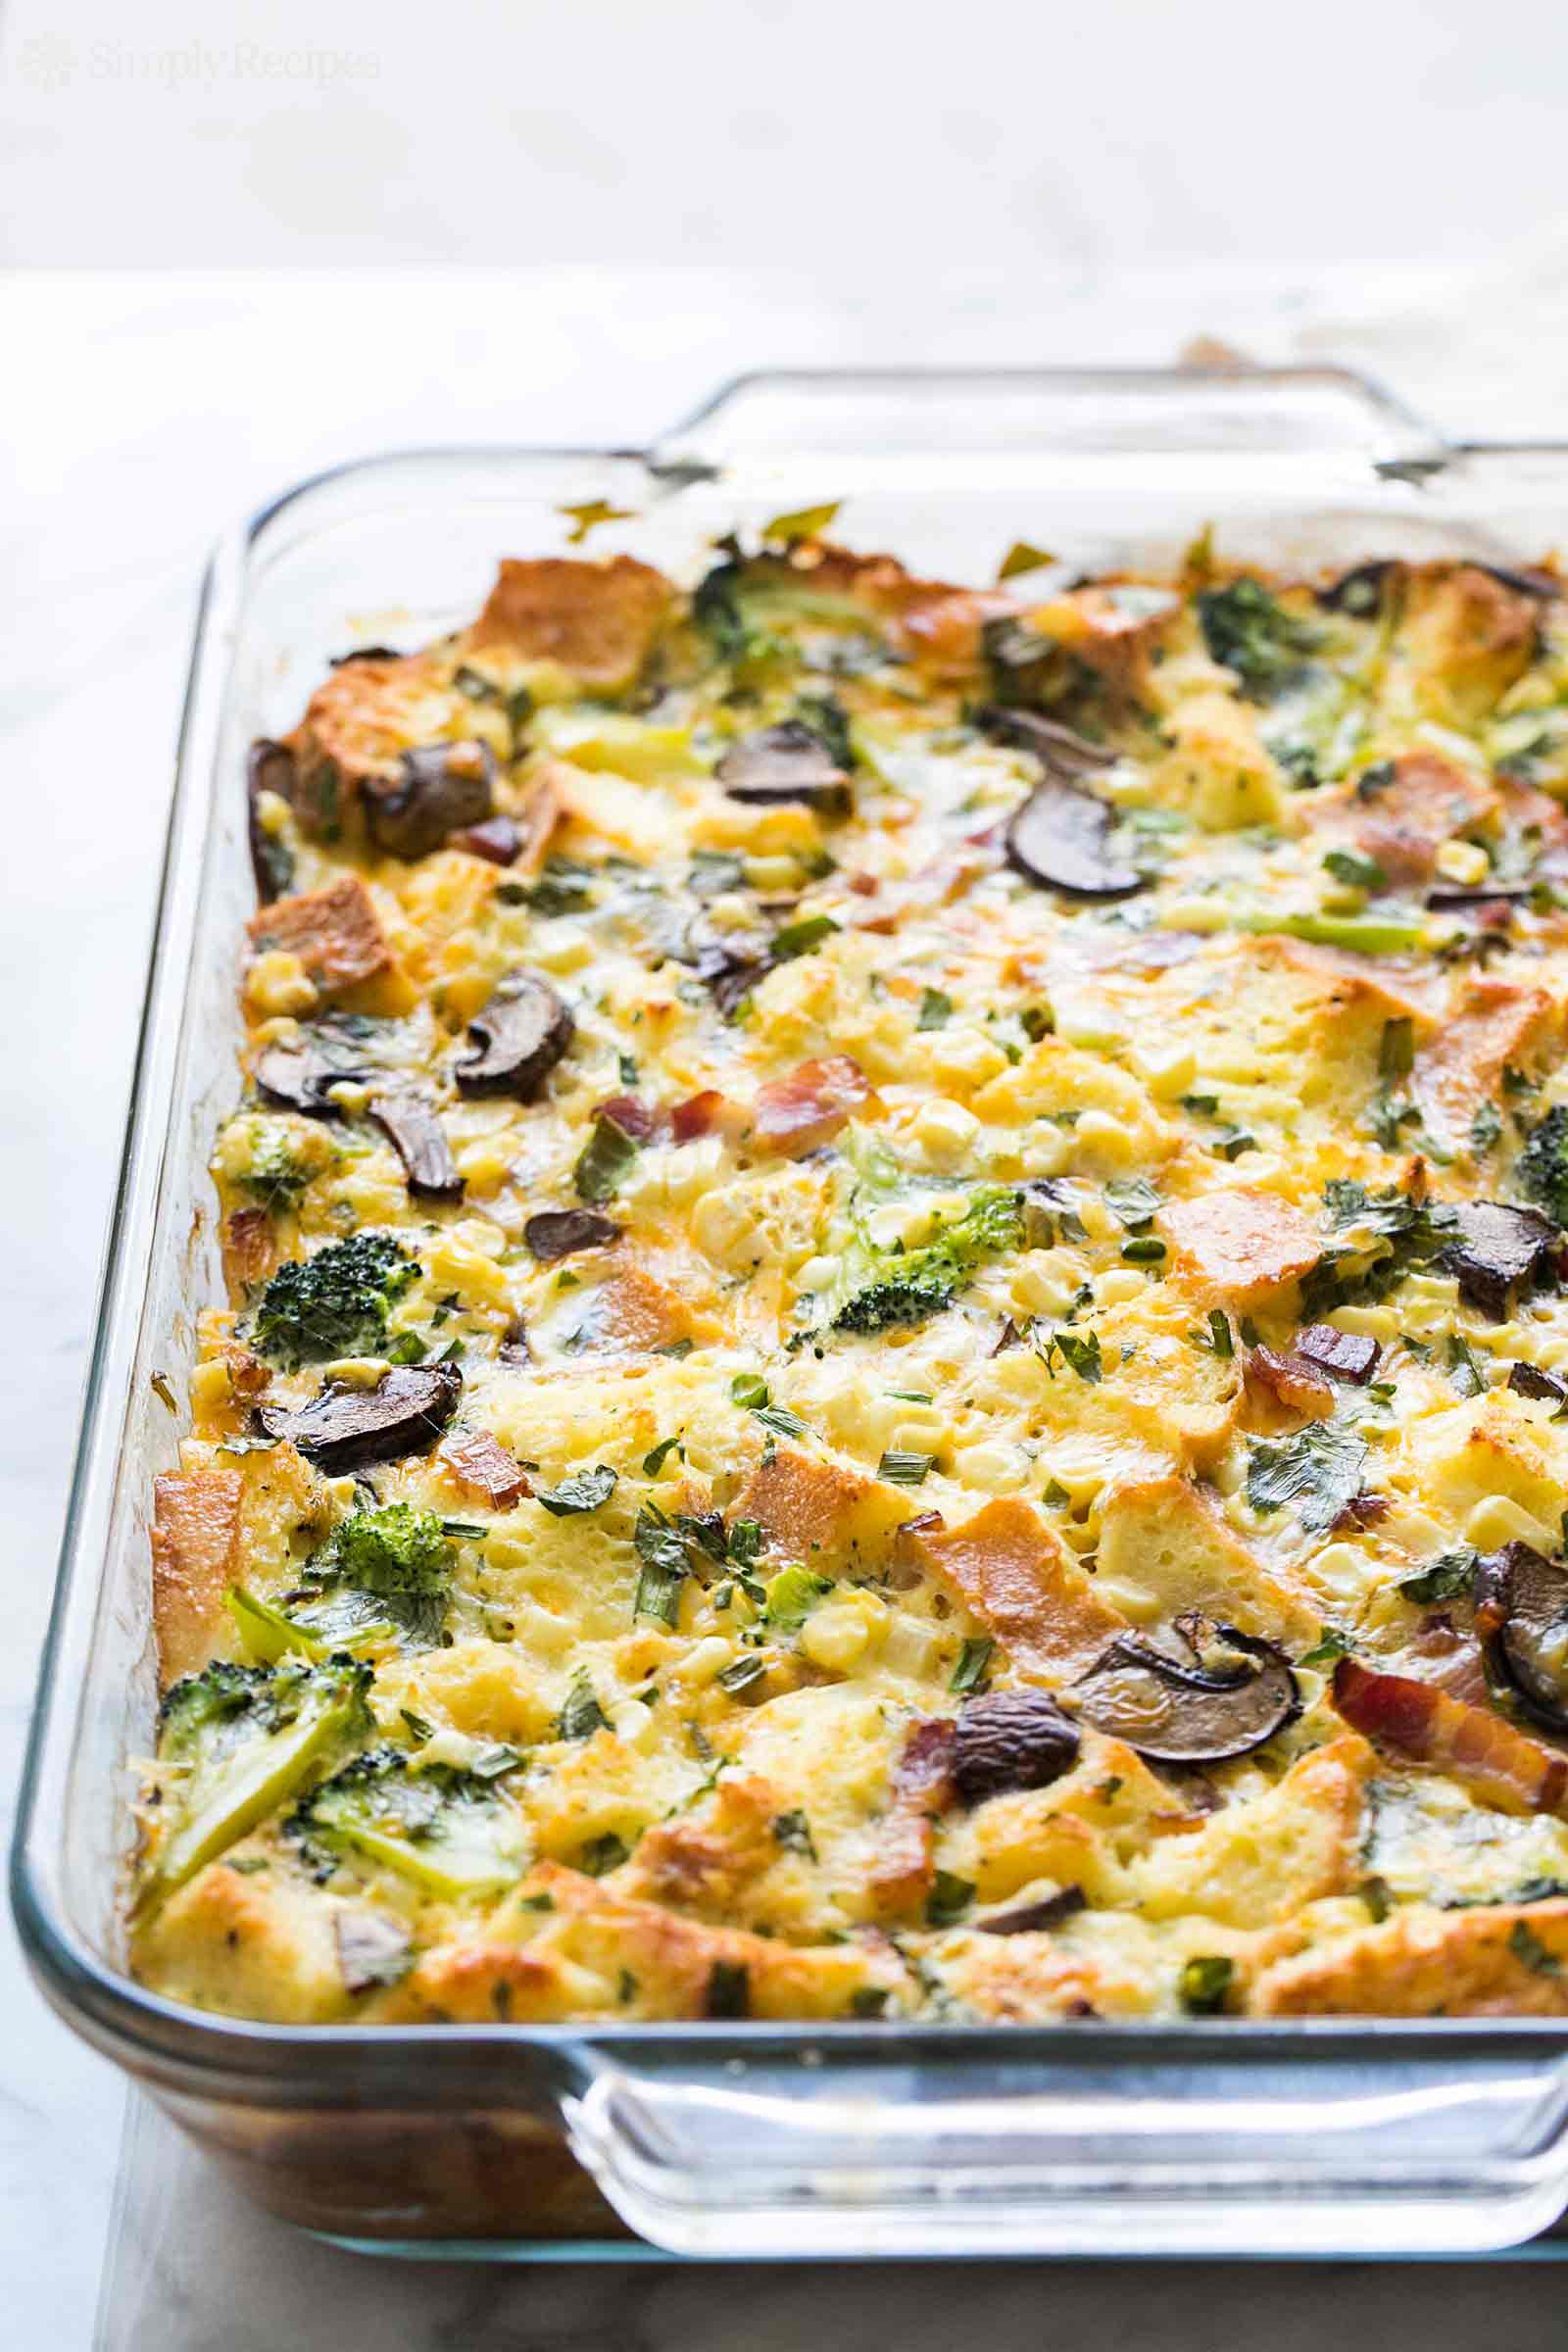 Egg And Bacon Casserole Without Bread
 egg bake with bread slices